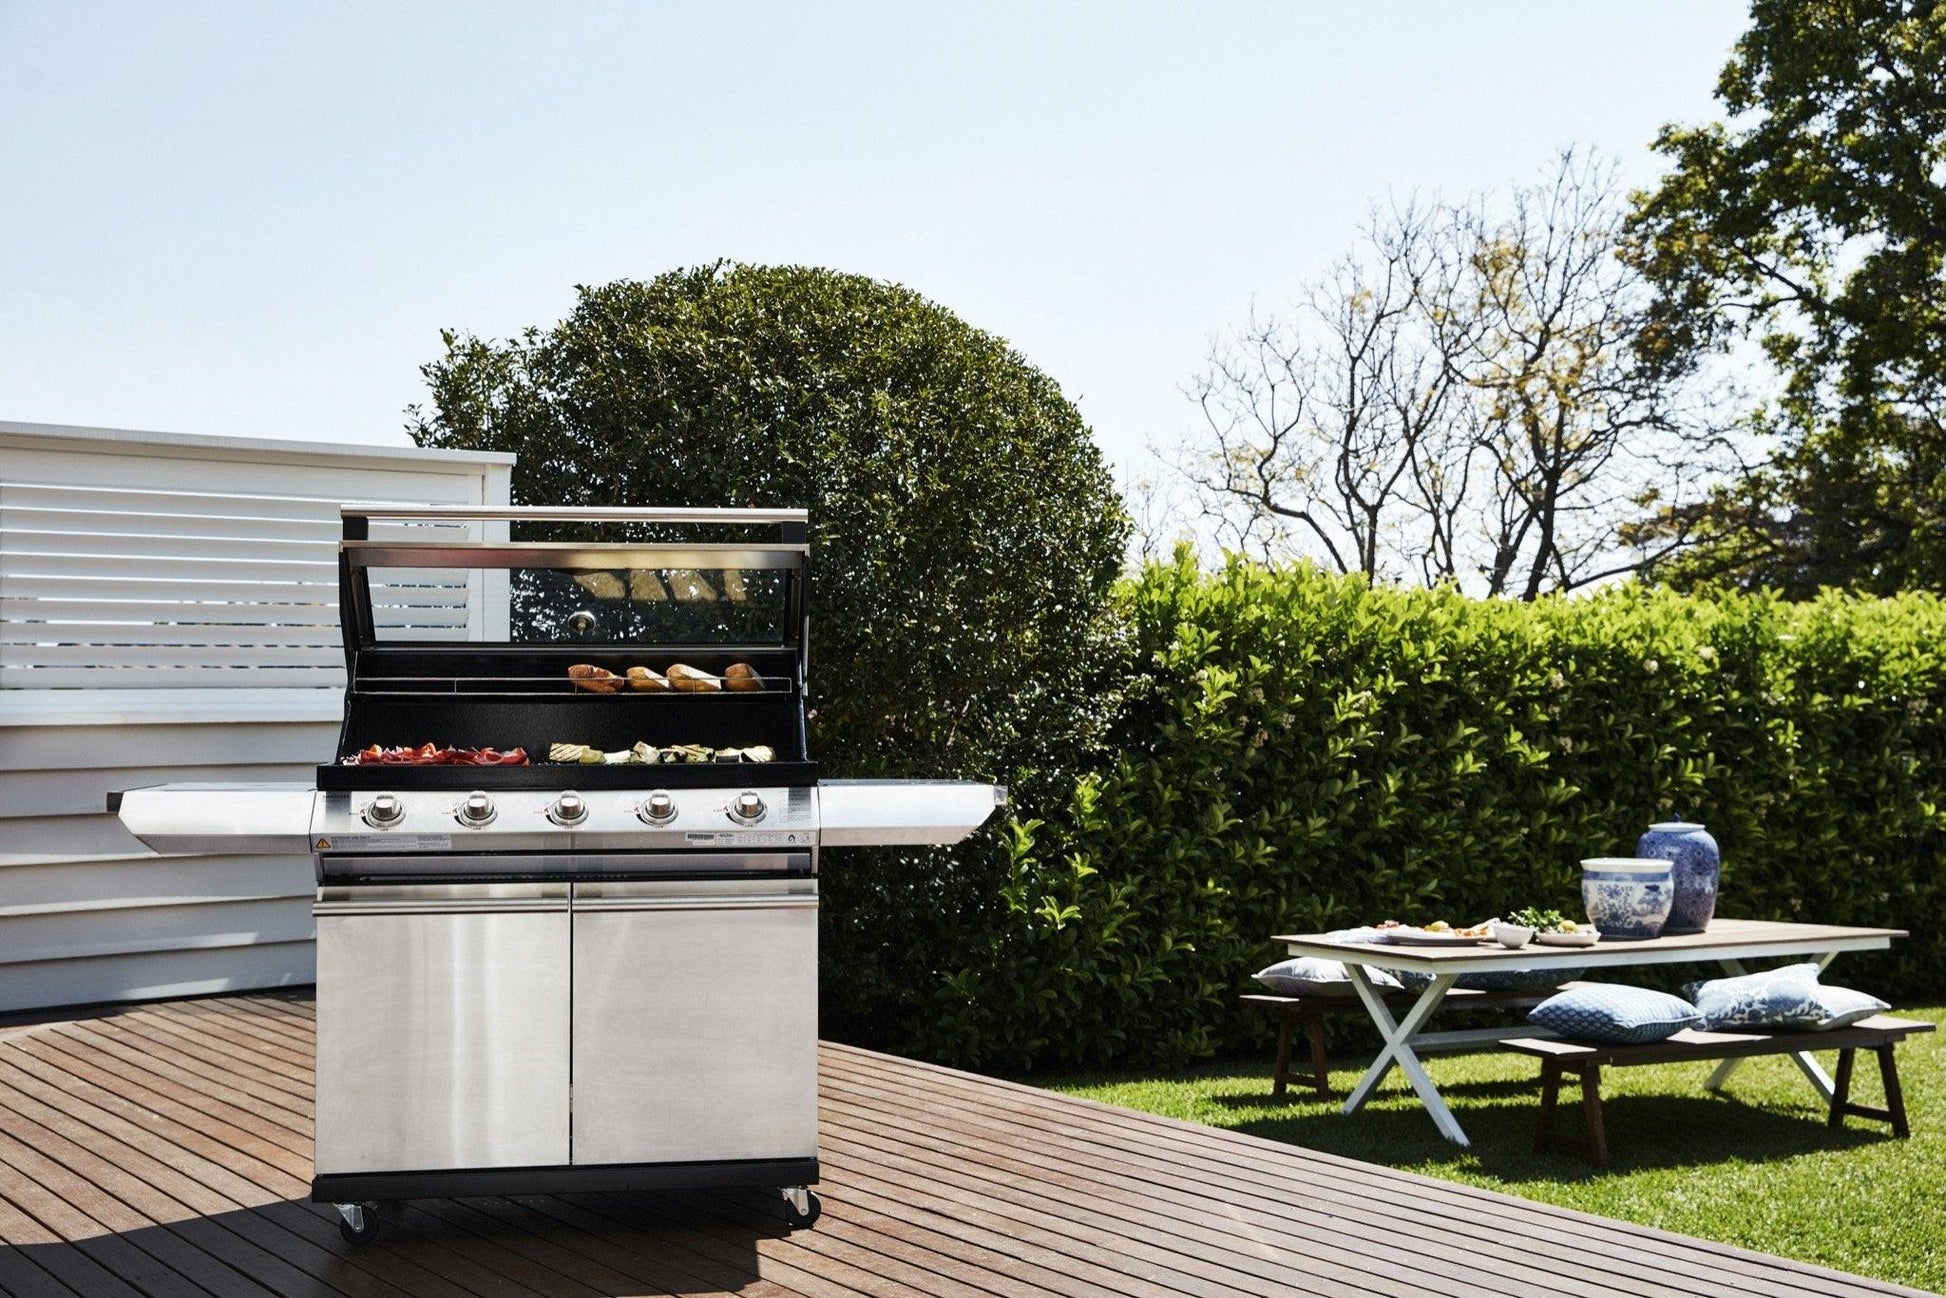 A Brisks BeefEater 1200S Series 4 Burner BBQ & Trolley with food items on the grates is situated on a wooden deck, embodying a modern appeal. Behind the grill is a lush hedge and clear sky. To the right, a low white table with a blue vase, plates, and cushions enhances the BBQ vibe on the grass.